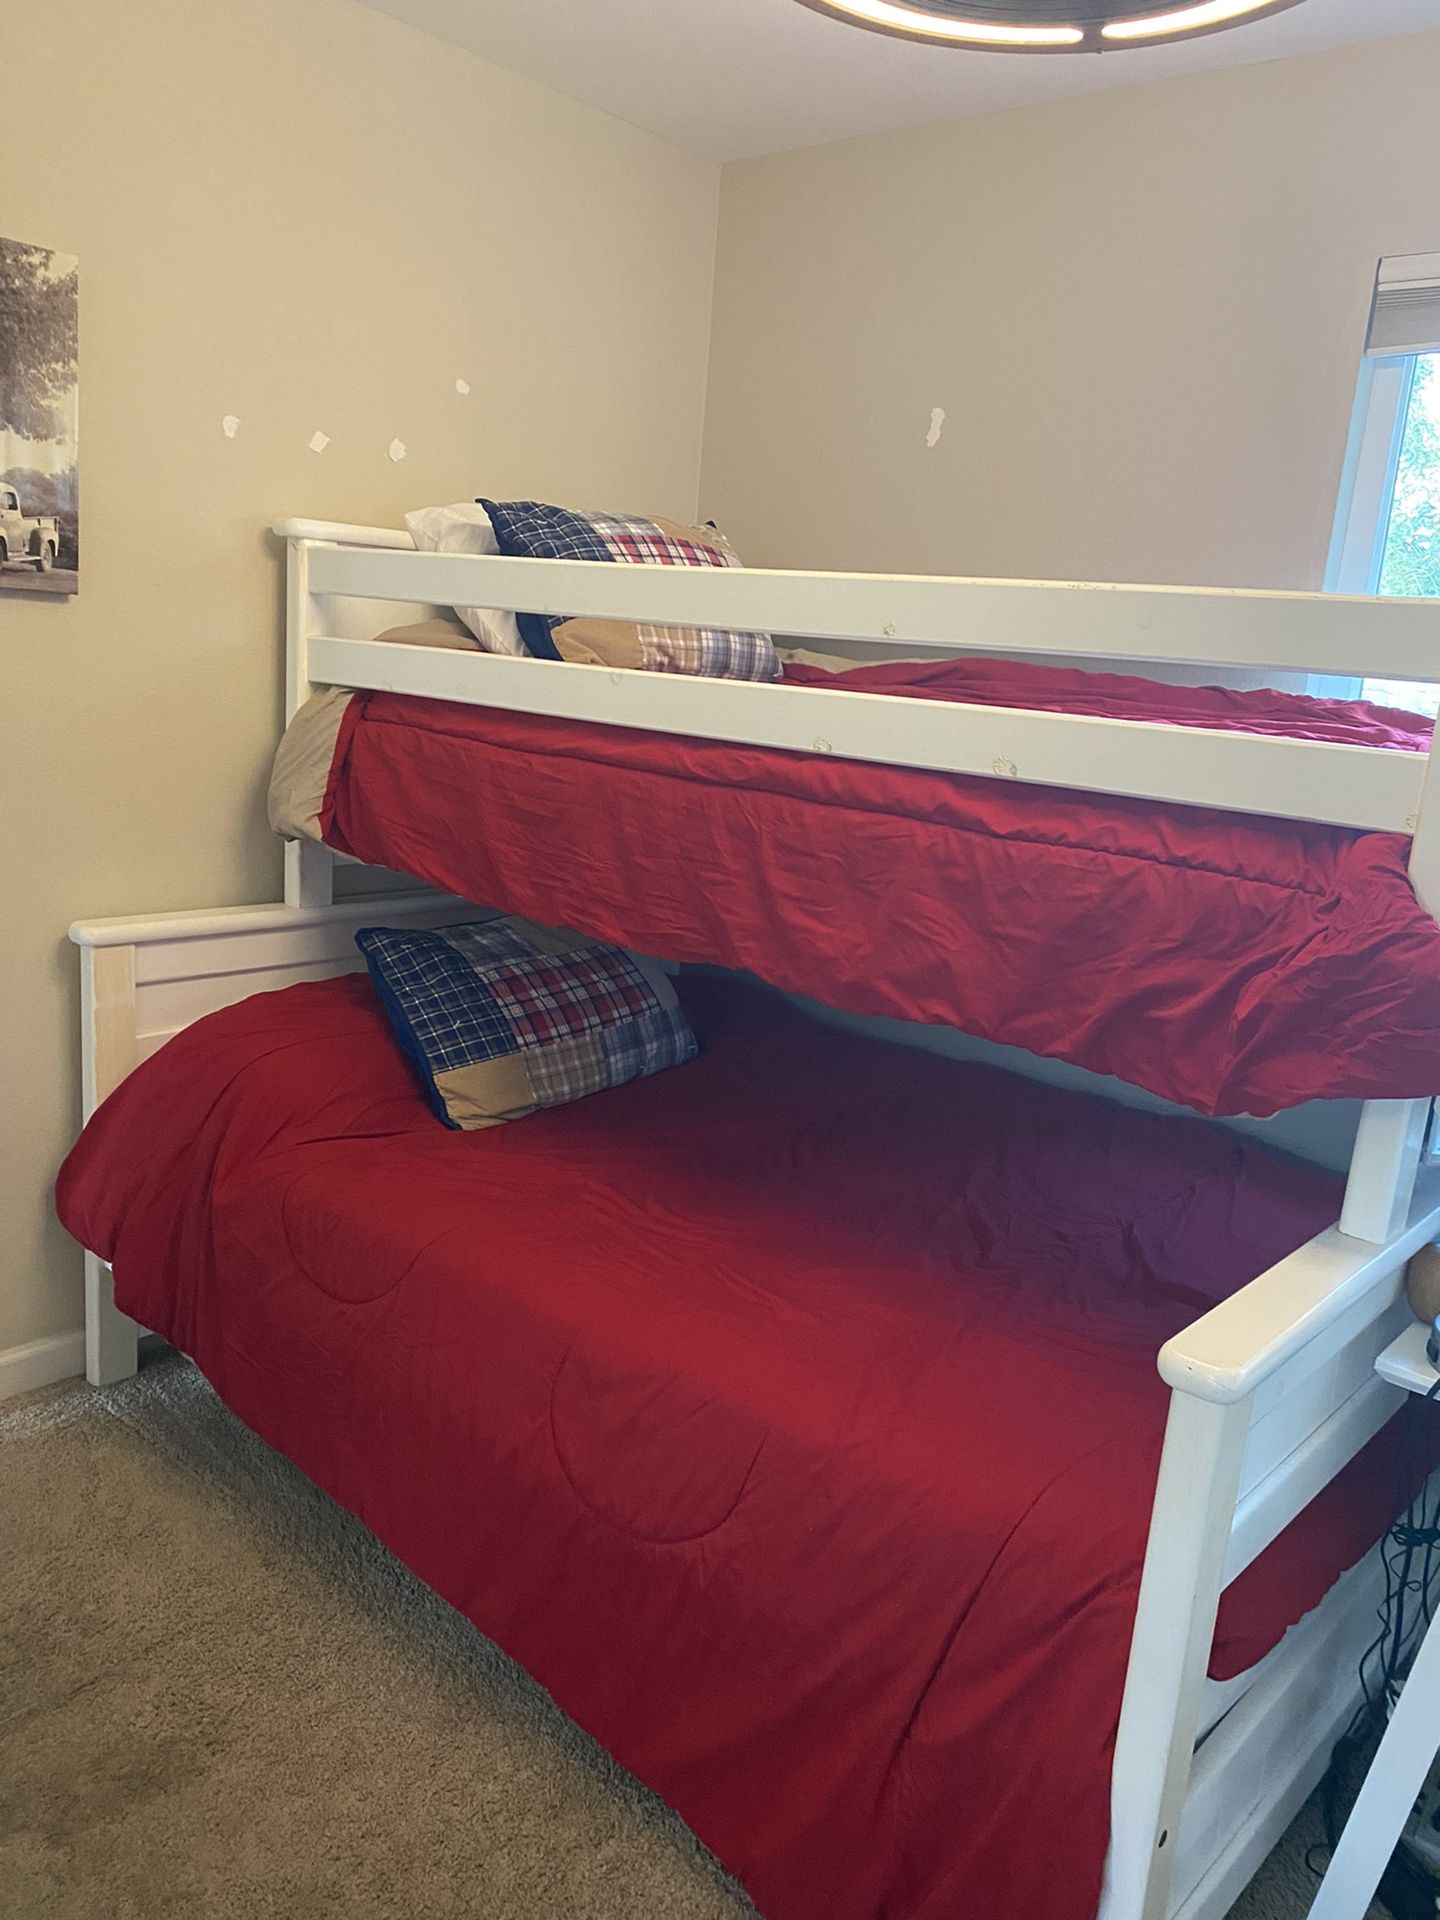 Bunk bed/dresser Combo For Sale